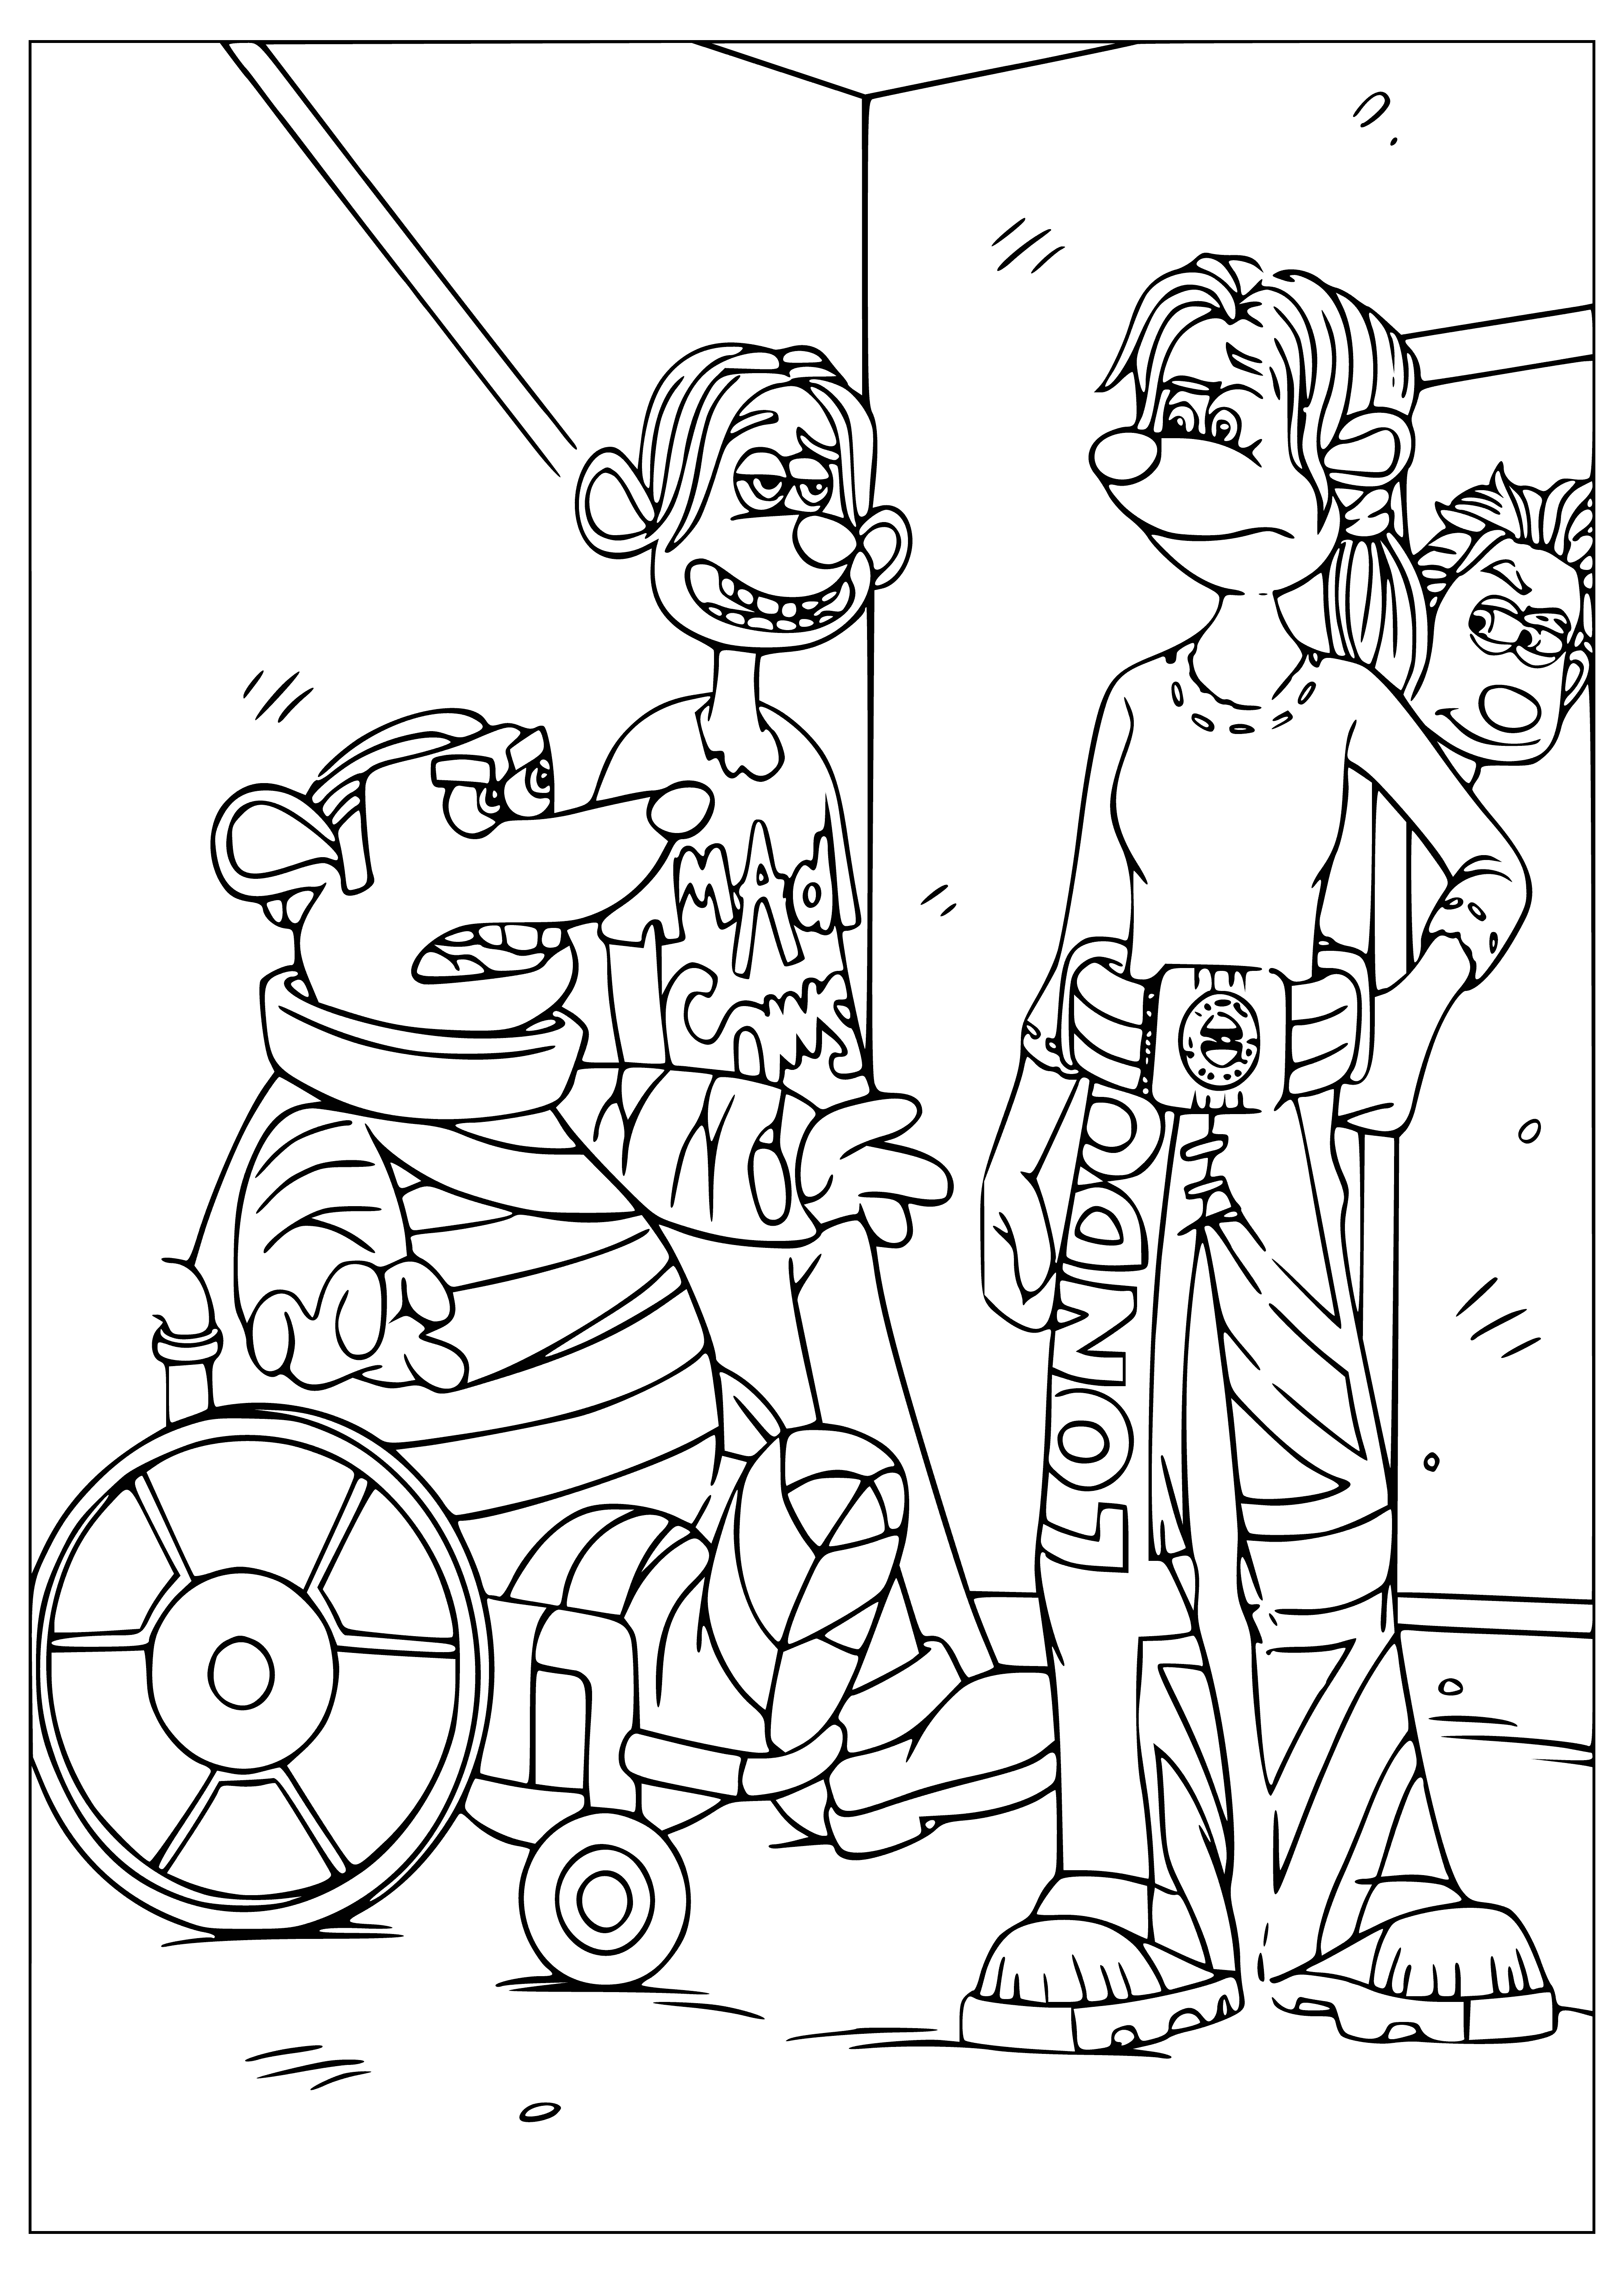 In plaster coloring page